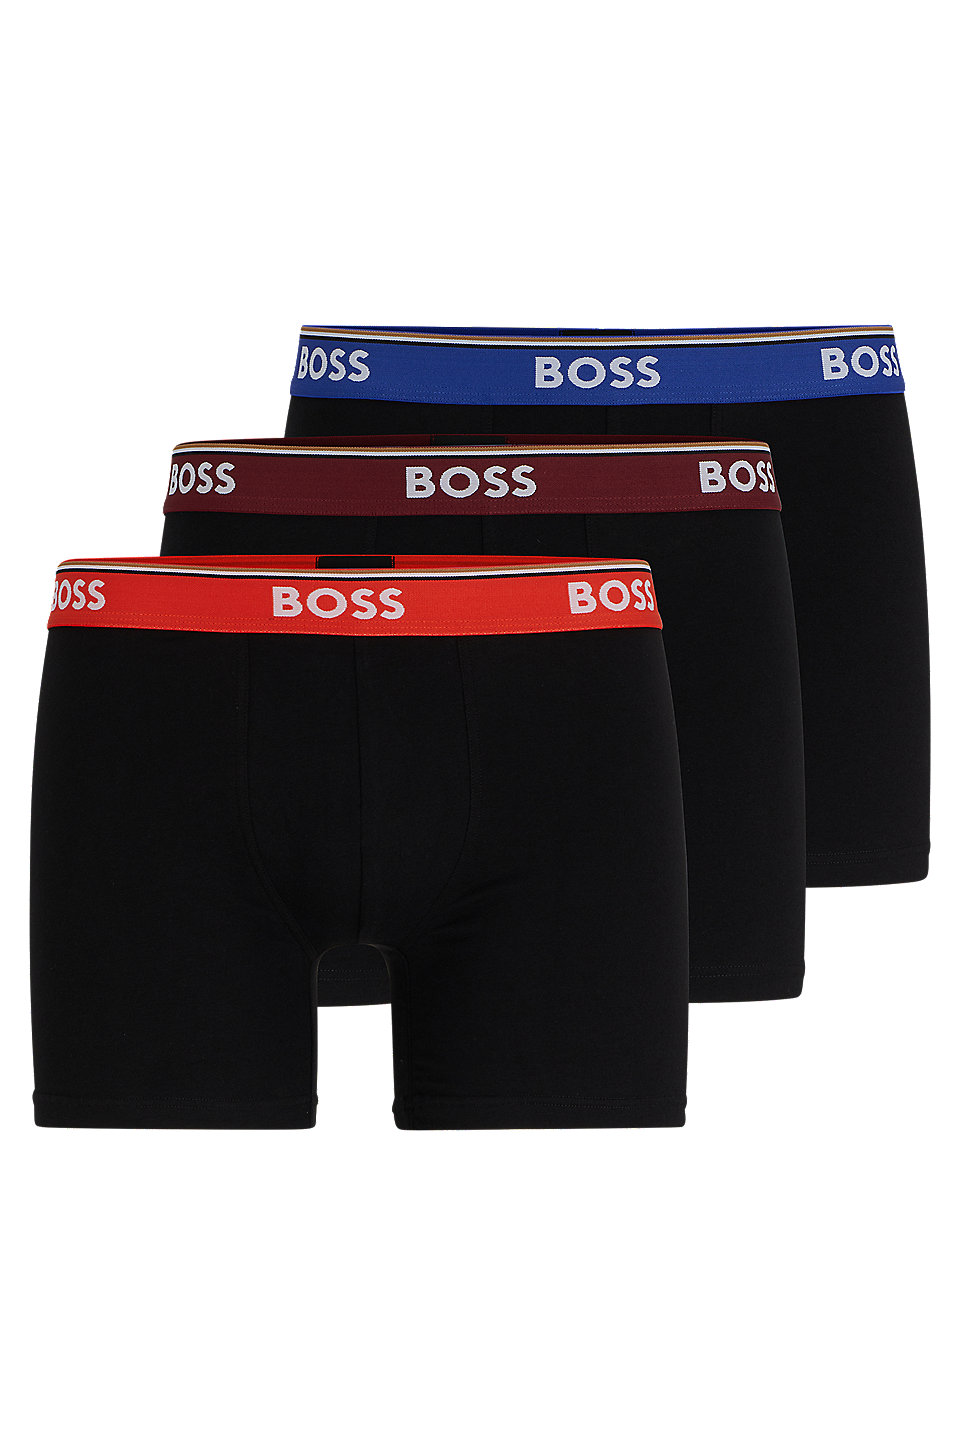 Nike Set 3 Pairs of Stretch Cotton Boxer with Logoed Elastic Band